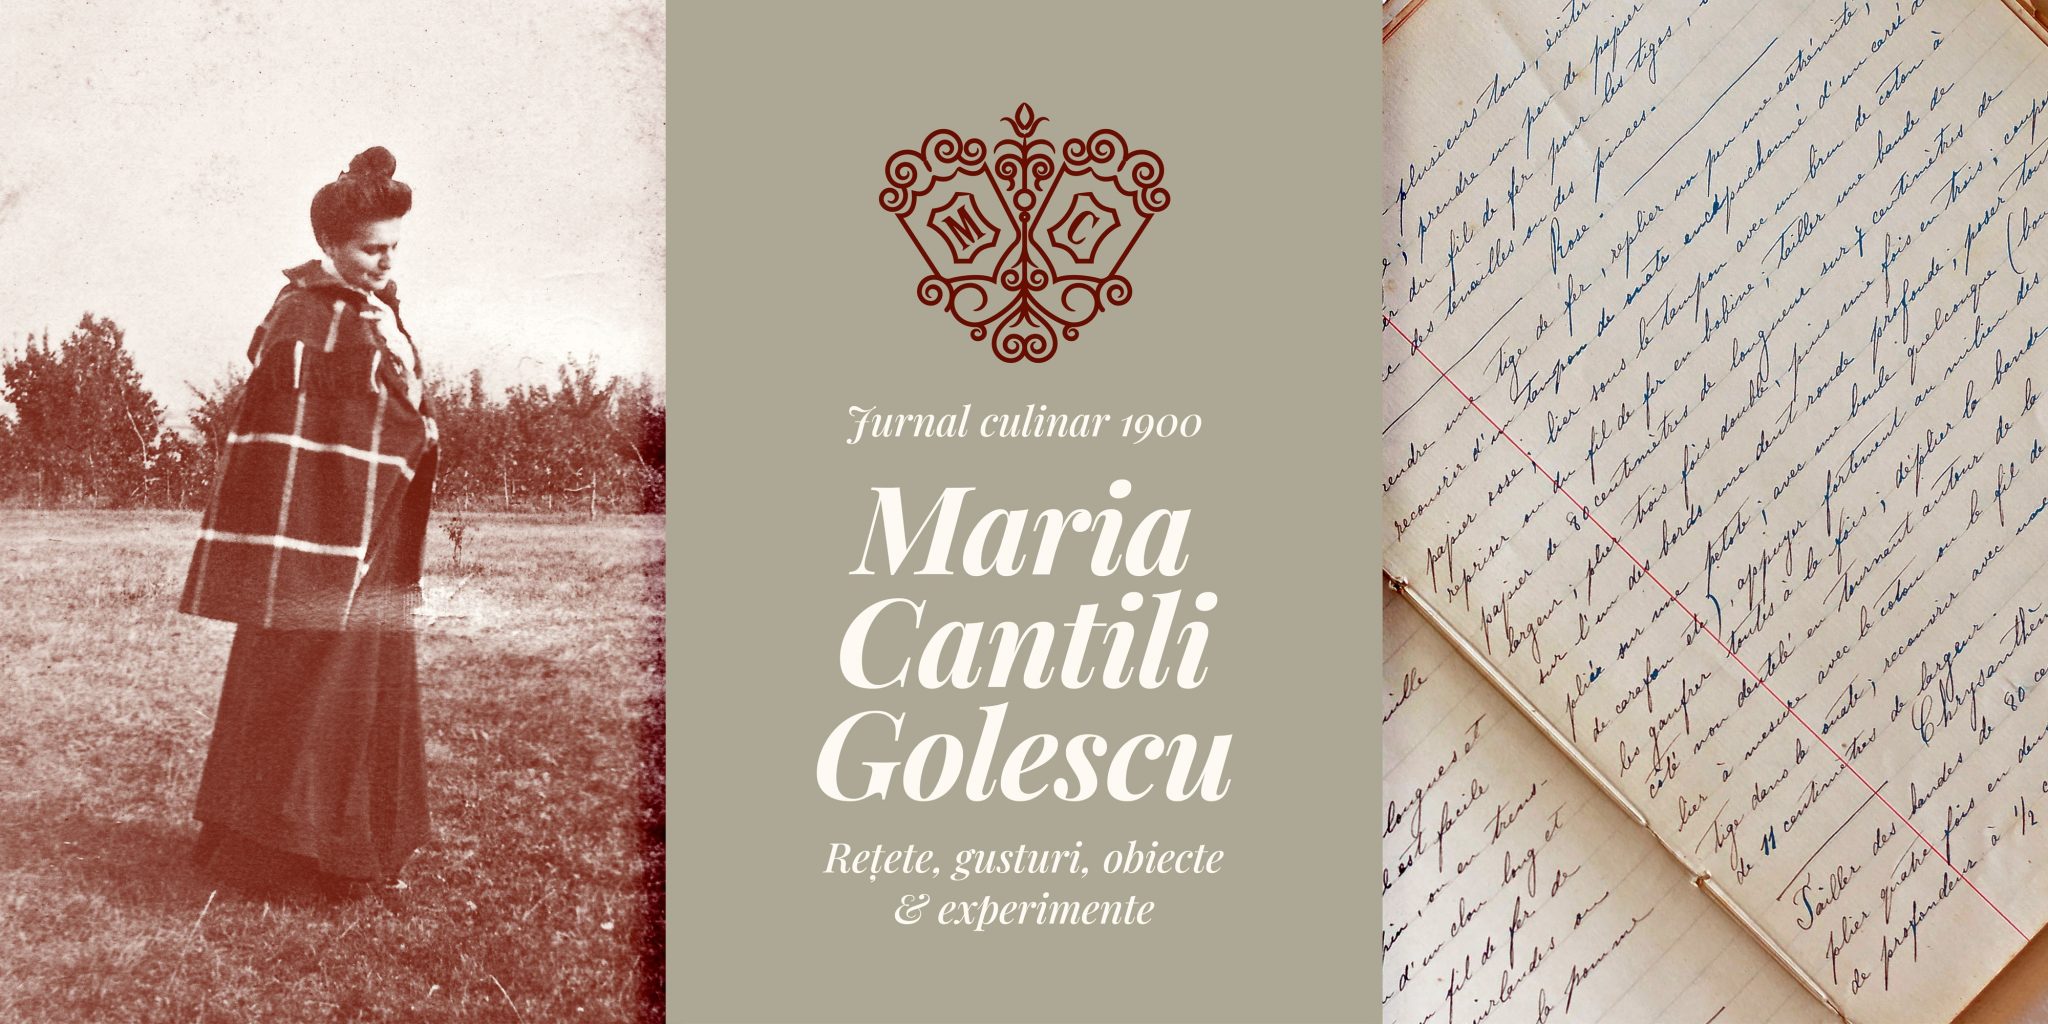 The Culinary Diary of Maria Cantili Golescu-recipes, tastes, objects and experiments